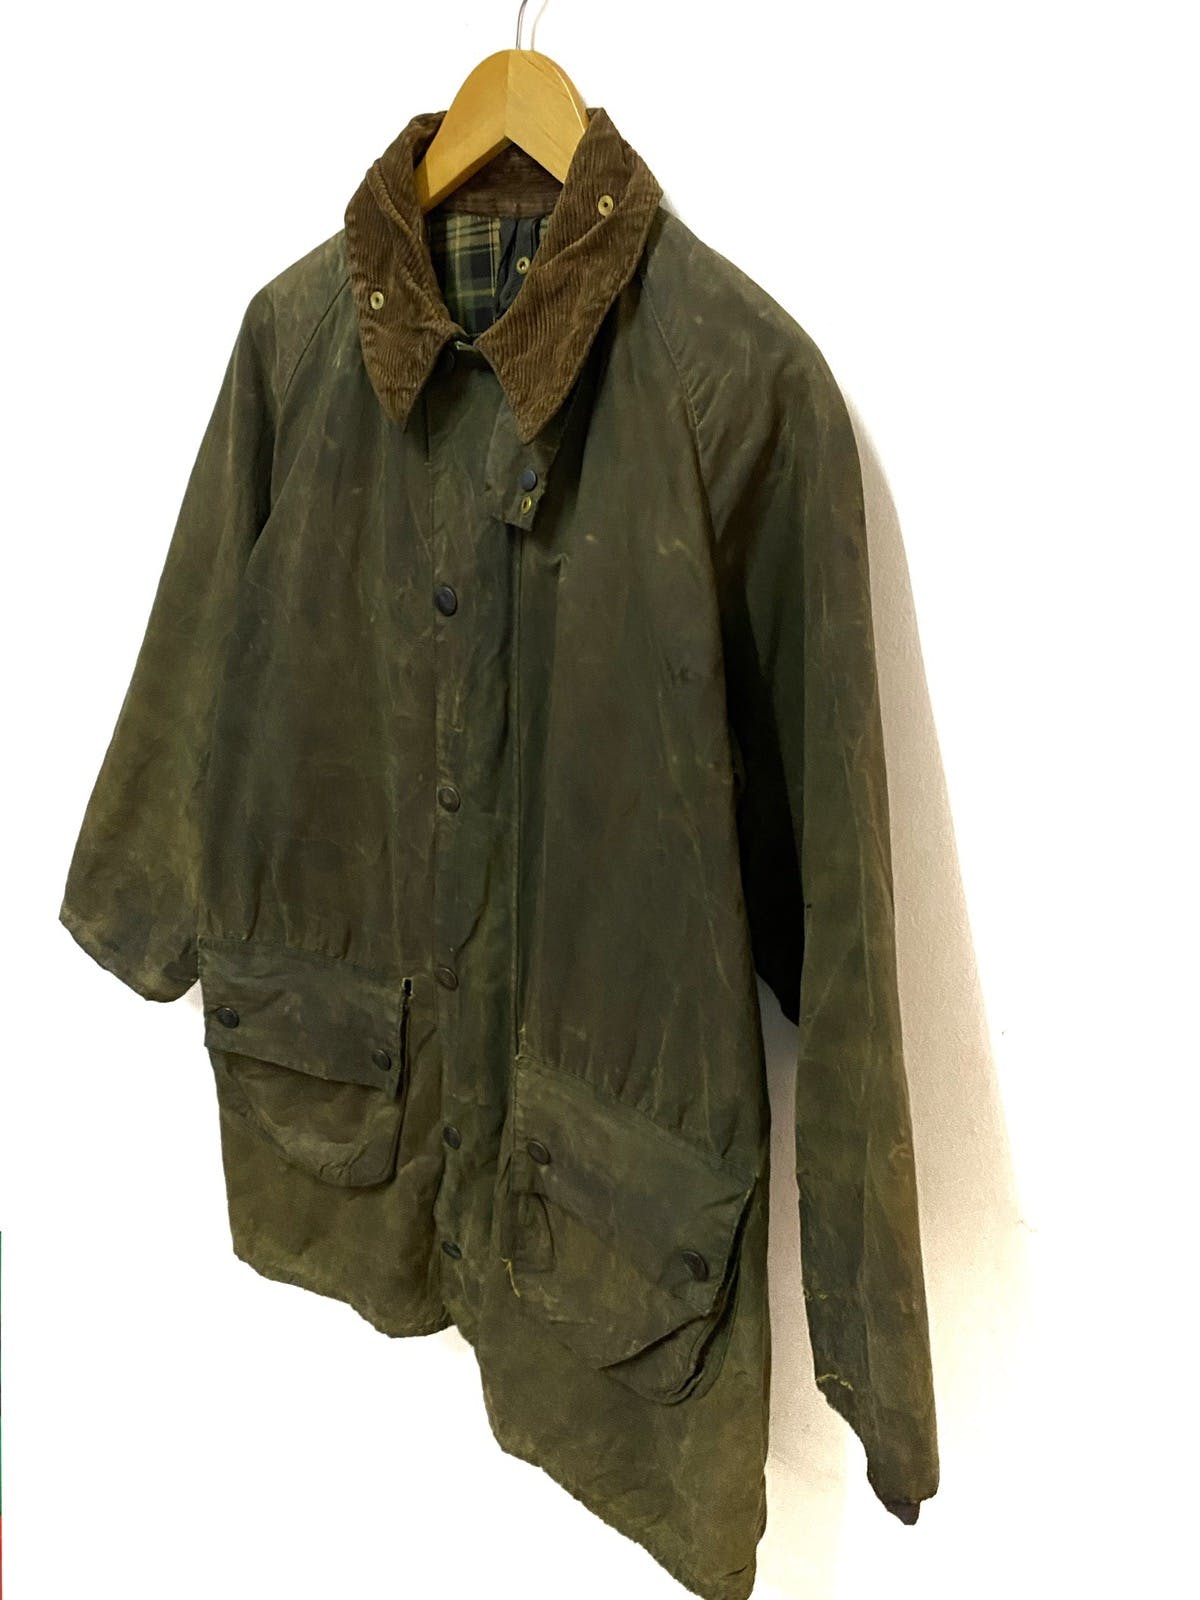 Barbour Gamefair Waxed Jacket Made in England - 5